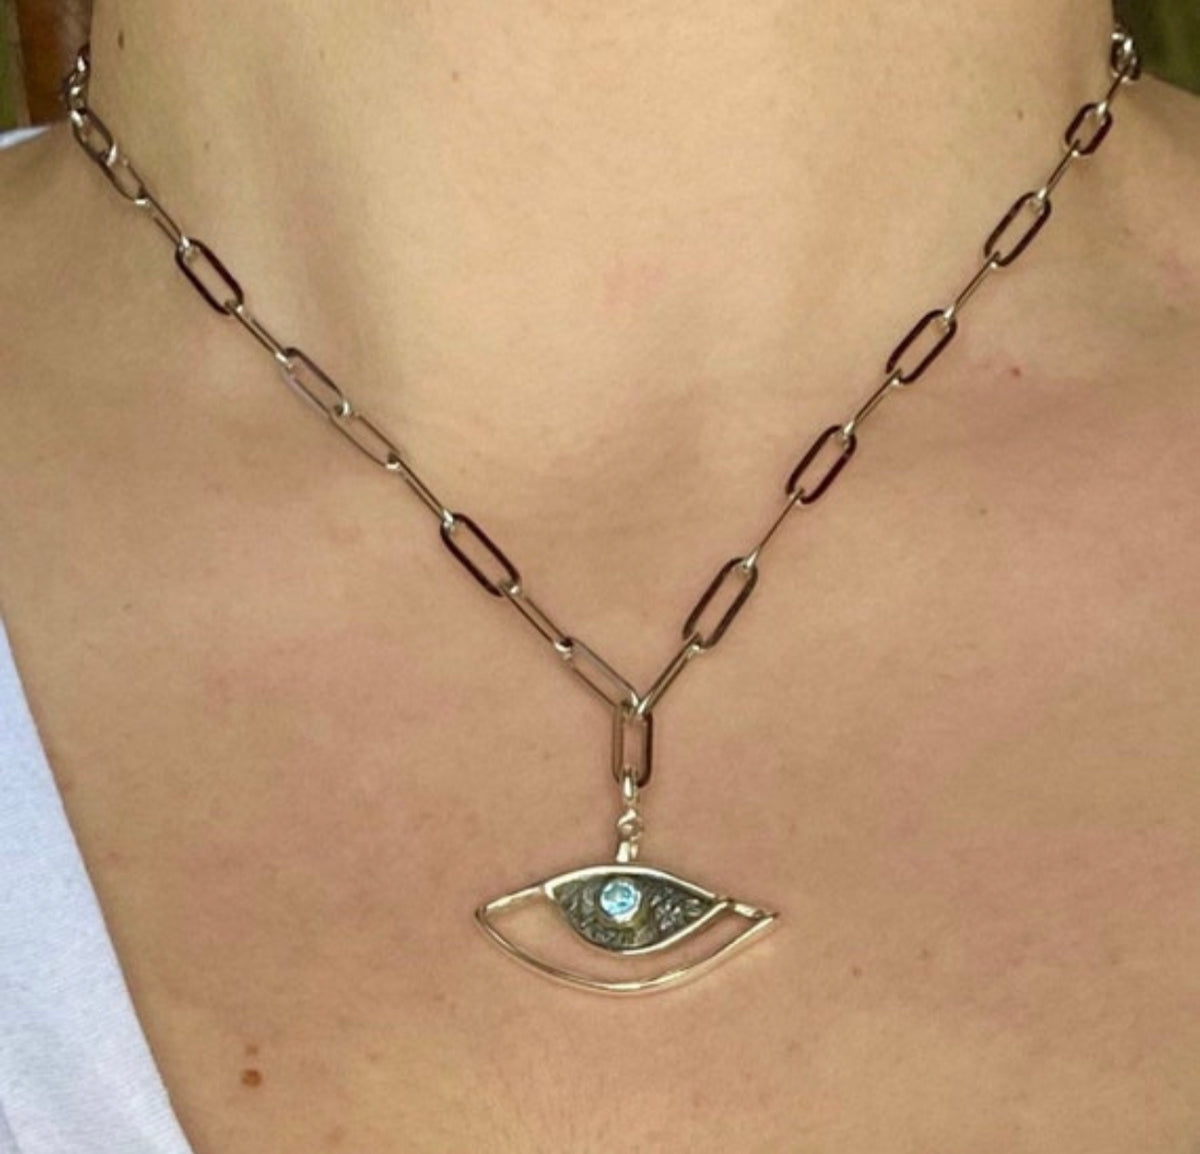 paper clip chain with evil eye necklace